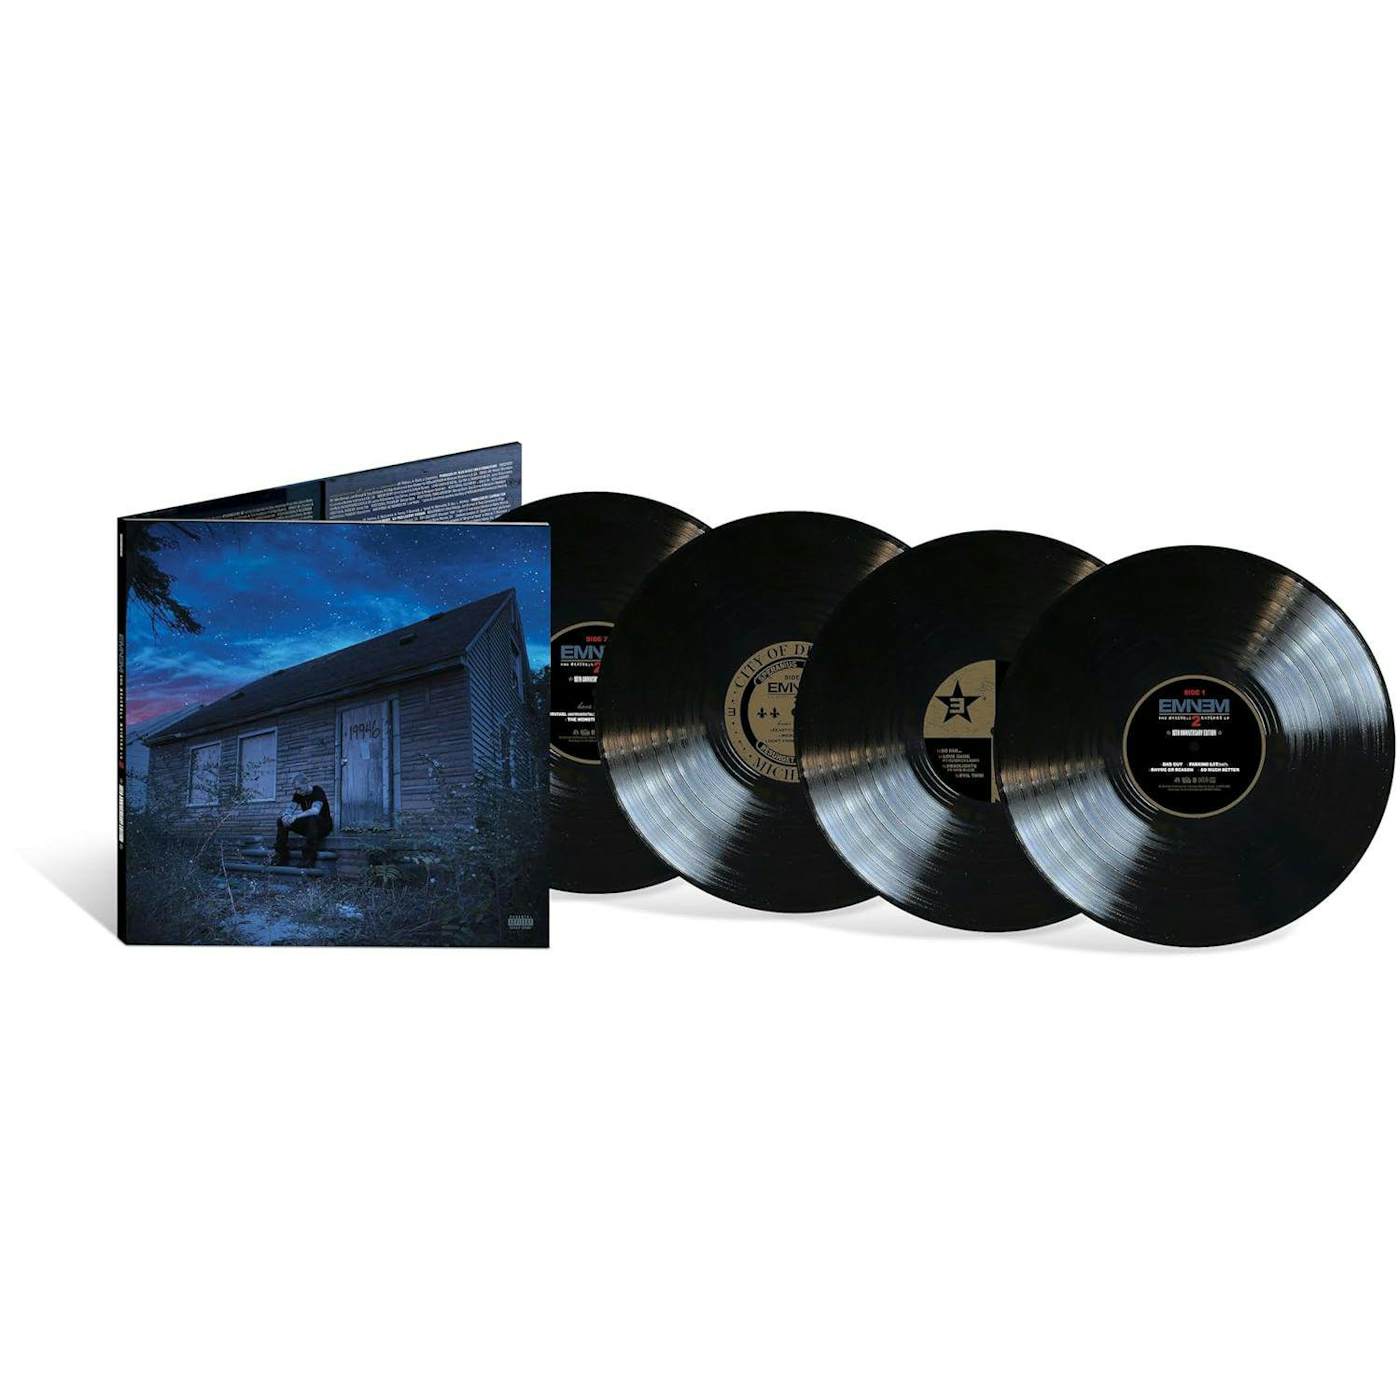 Eminem Marshall Mathers LP2 (10th Anniversary Edition/Explicit/Deluxe/180g/Expanded/4LP) Vinyl Record